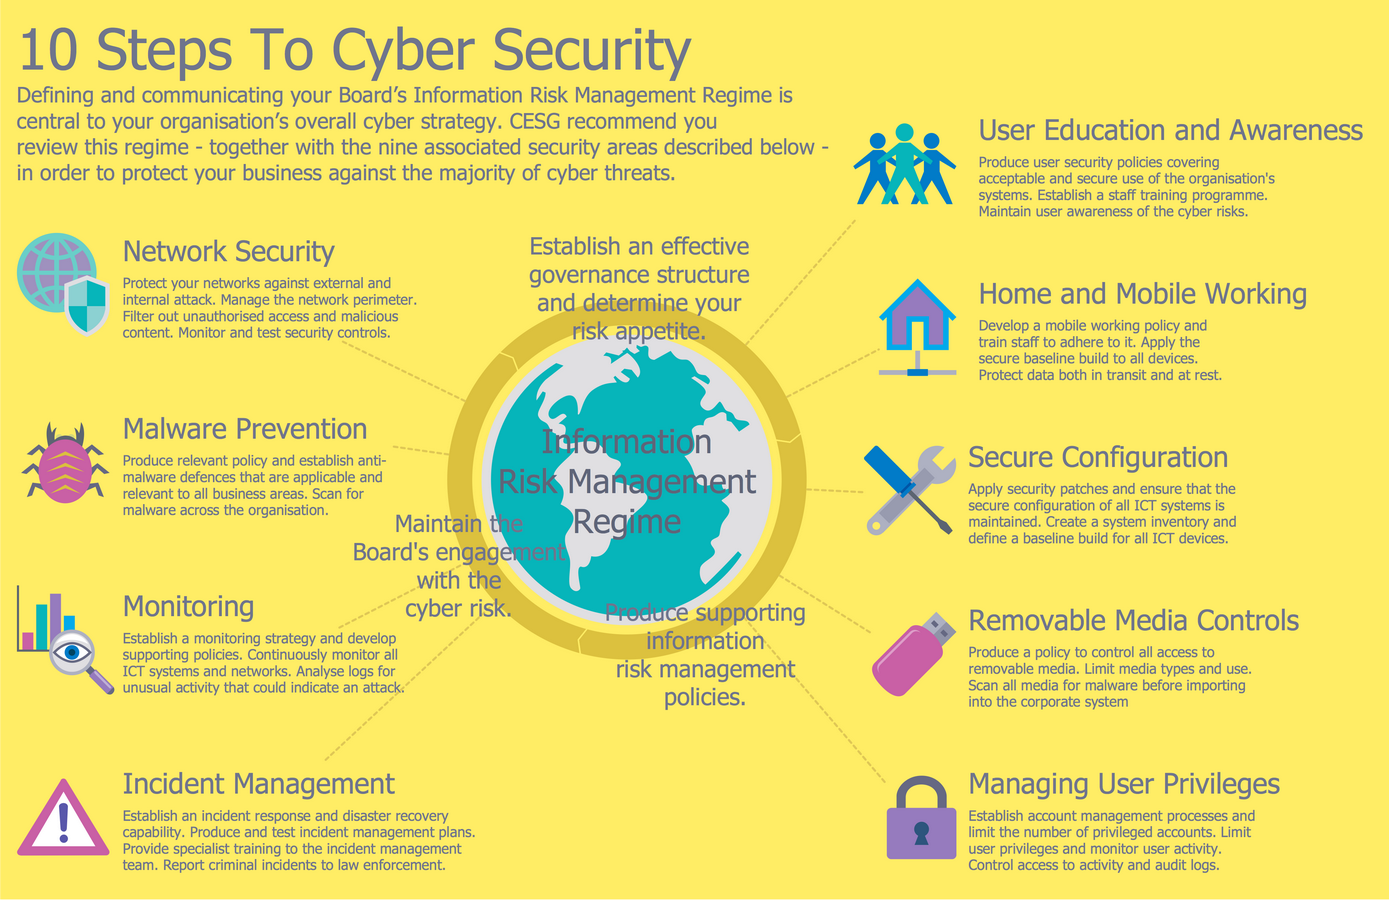 10 Steps to Cyber Security Infographic